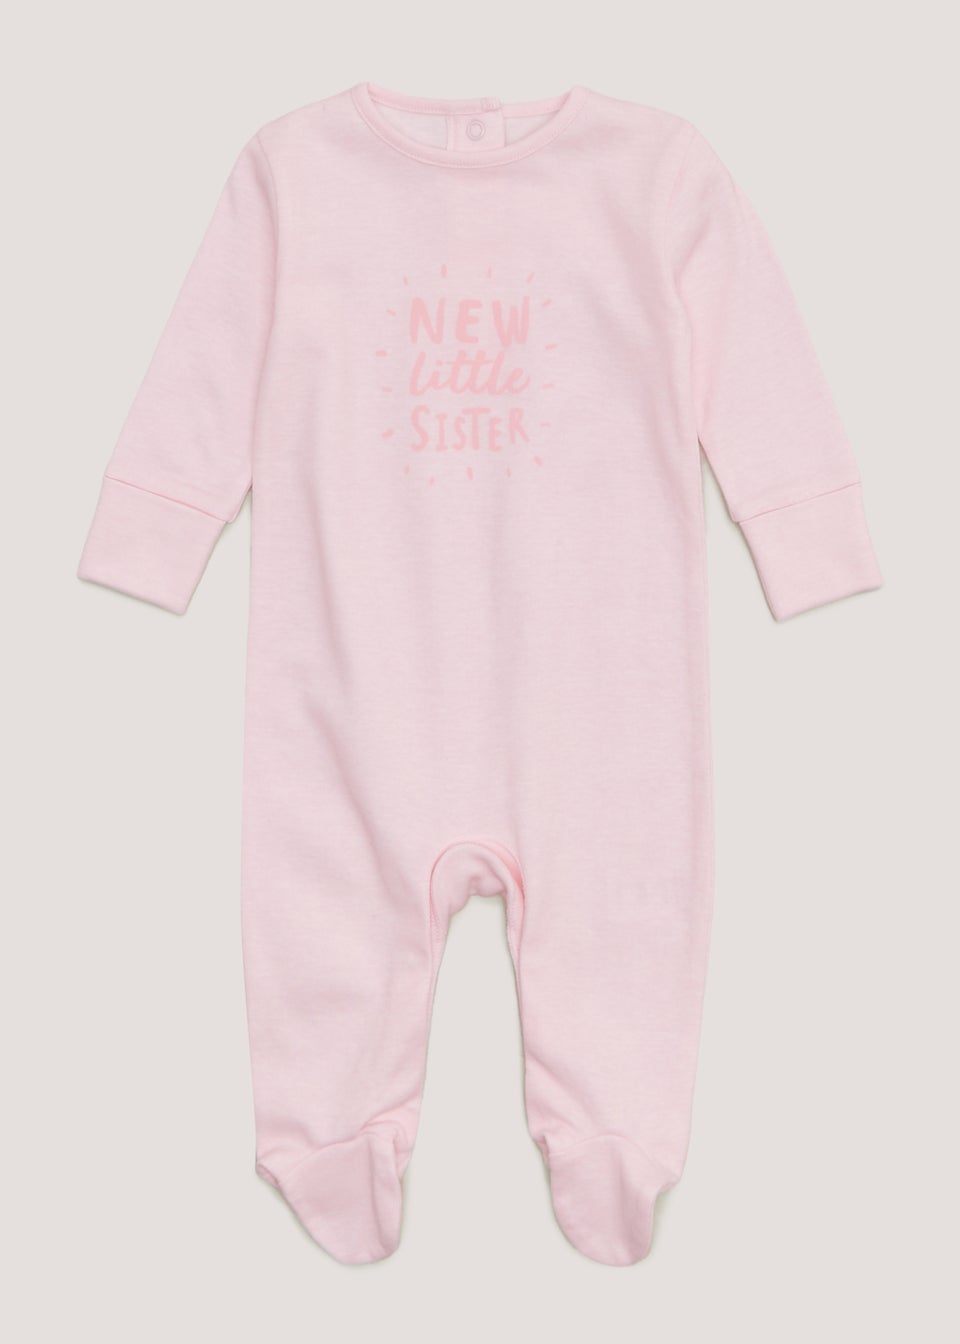 Baby Pink New Little Sister Sleepsuit (Tiny Baby-18mths)